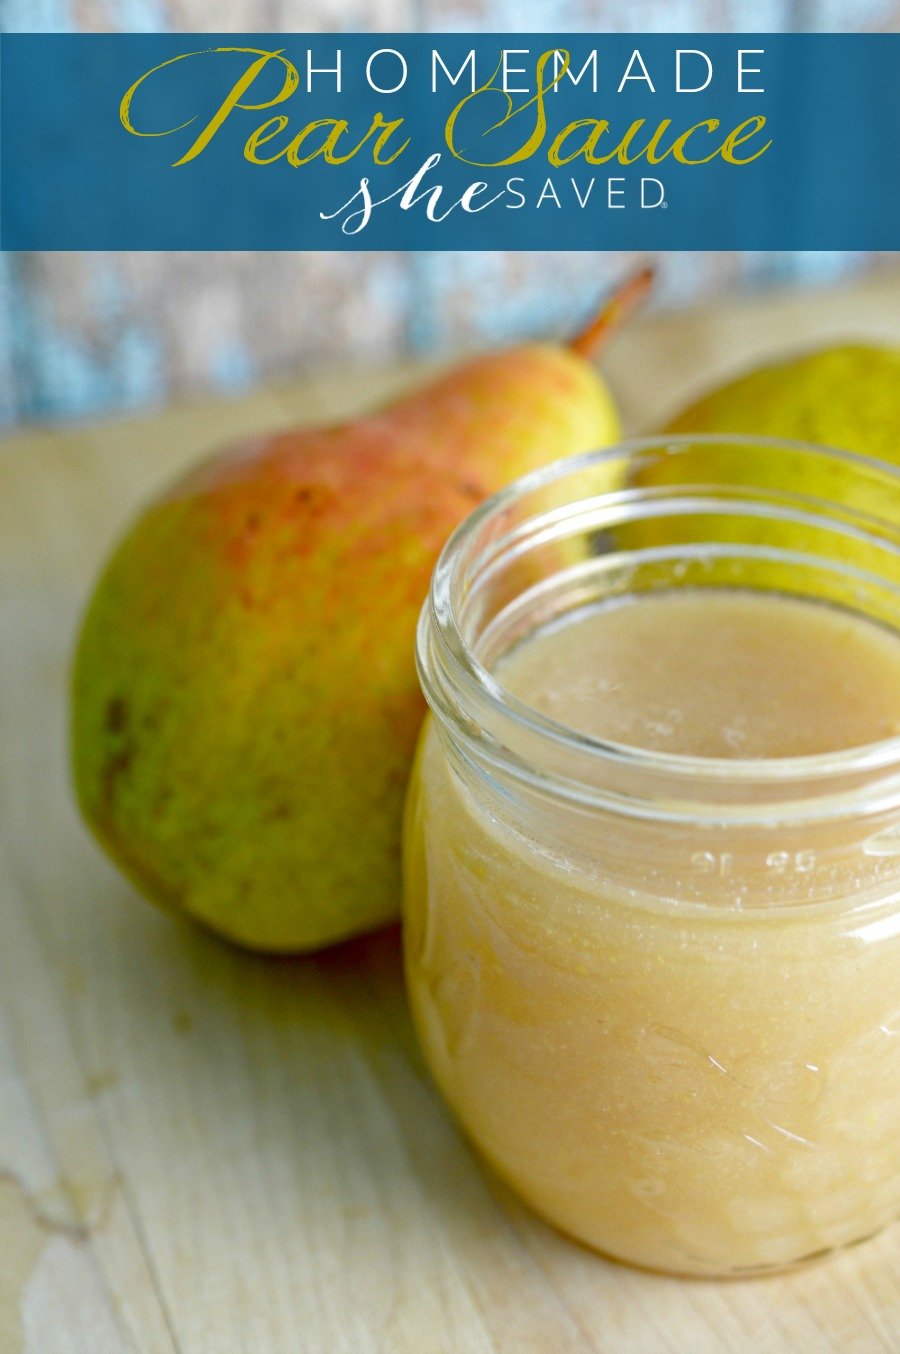 If you are looking for yummy ways to use pears this delicious homemade pear sauce will be a favorite, perfect as a side or topping!